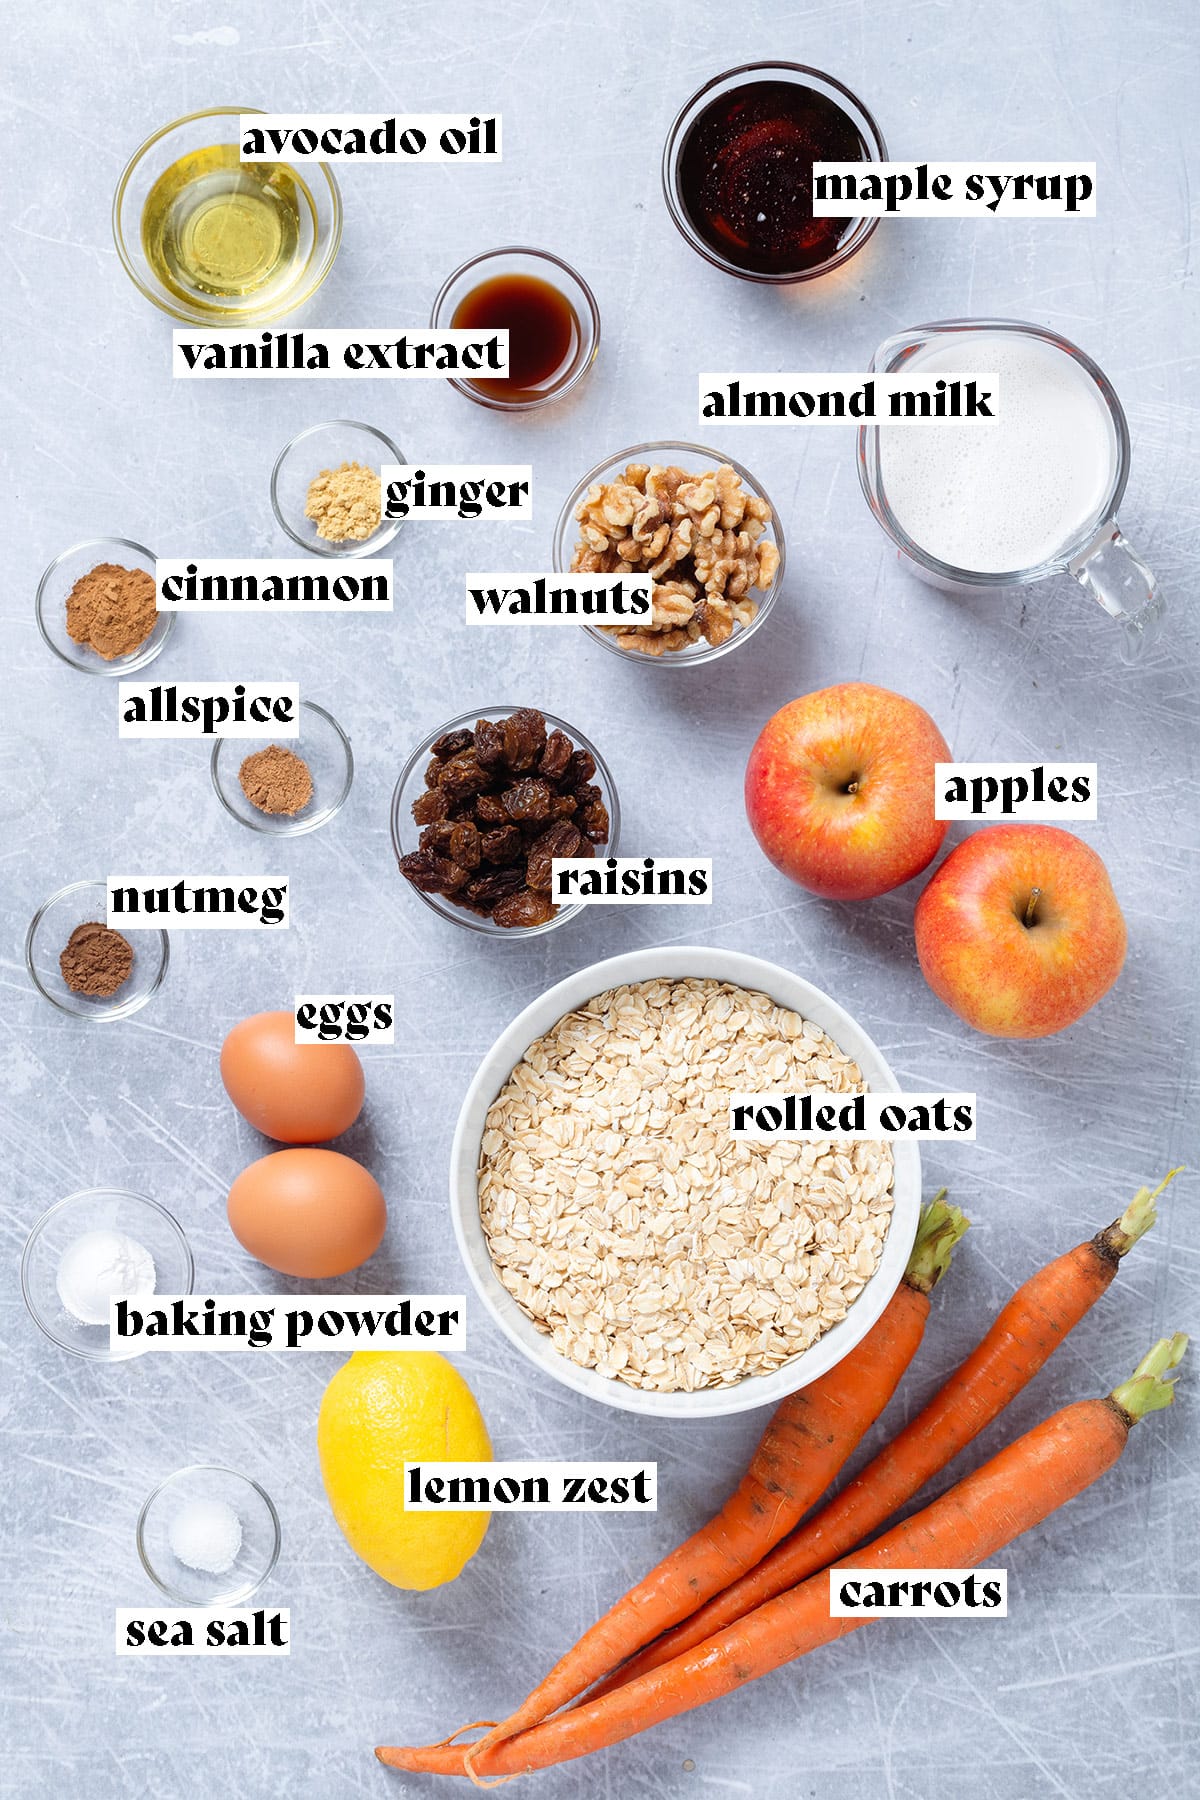 Ingredients for baked oatmeal laid out on a grey background.